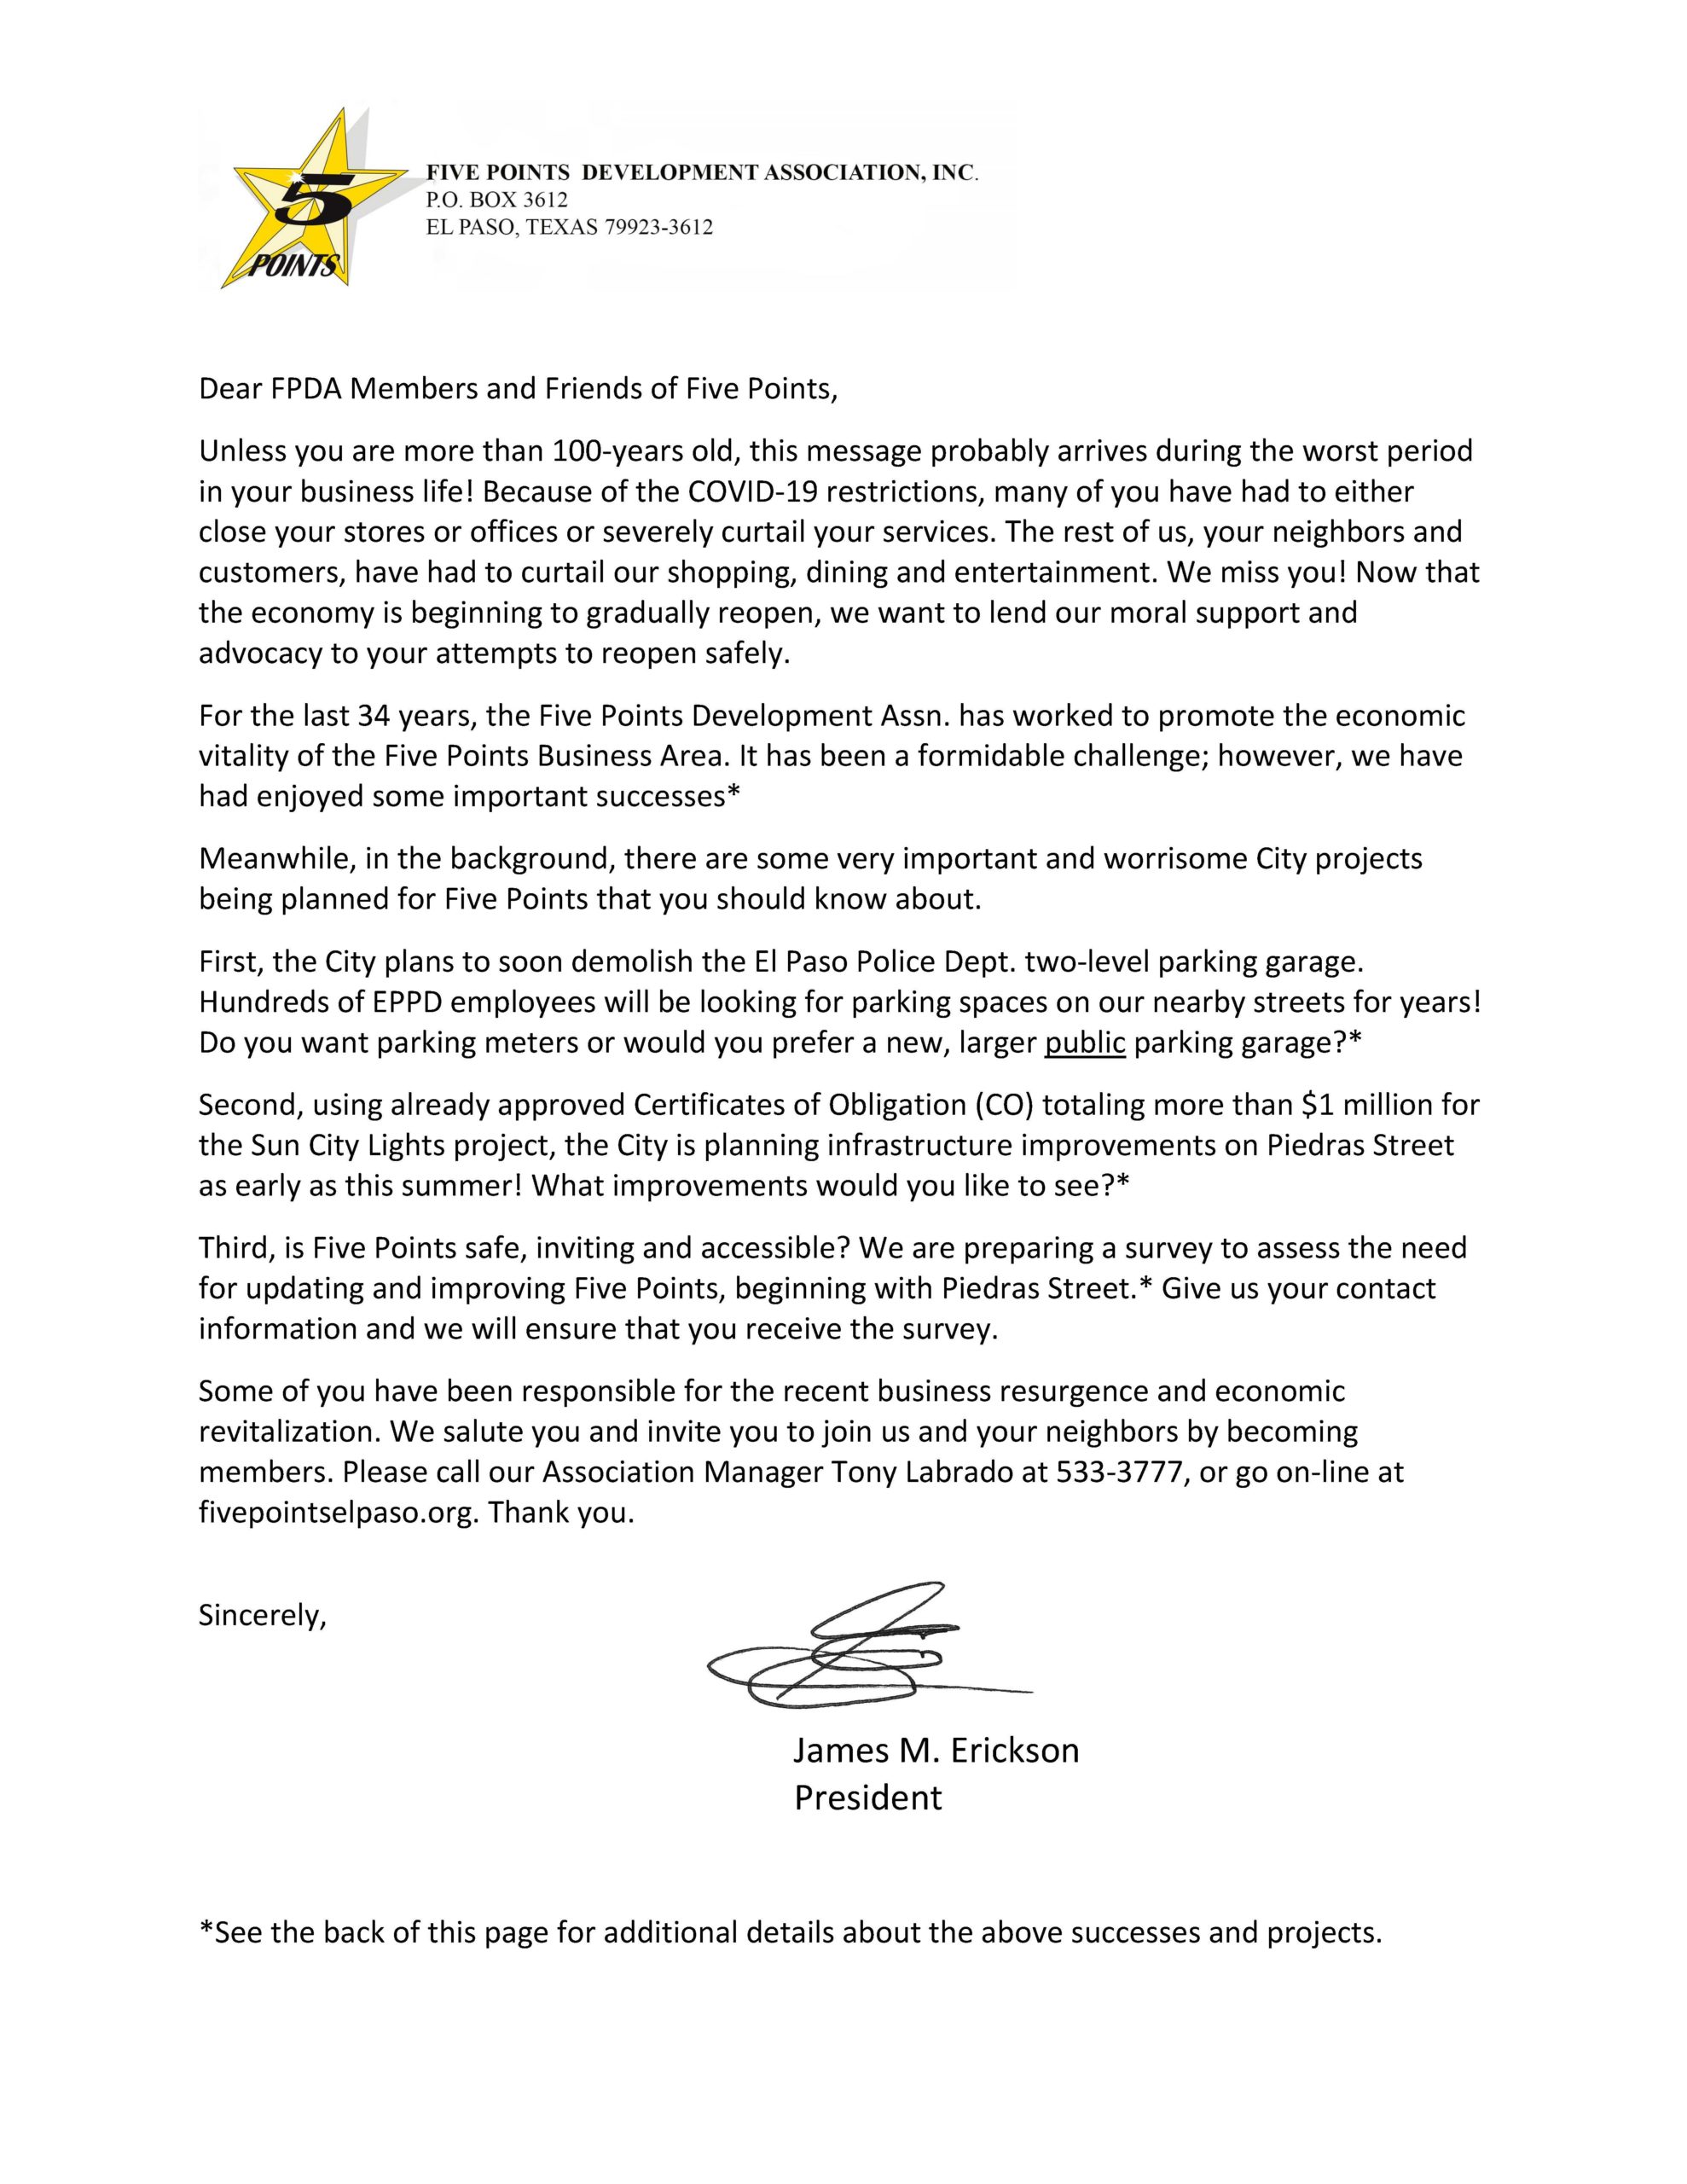 Letter from our Association President